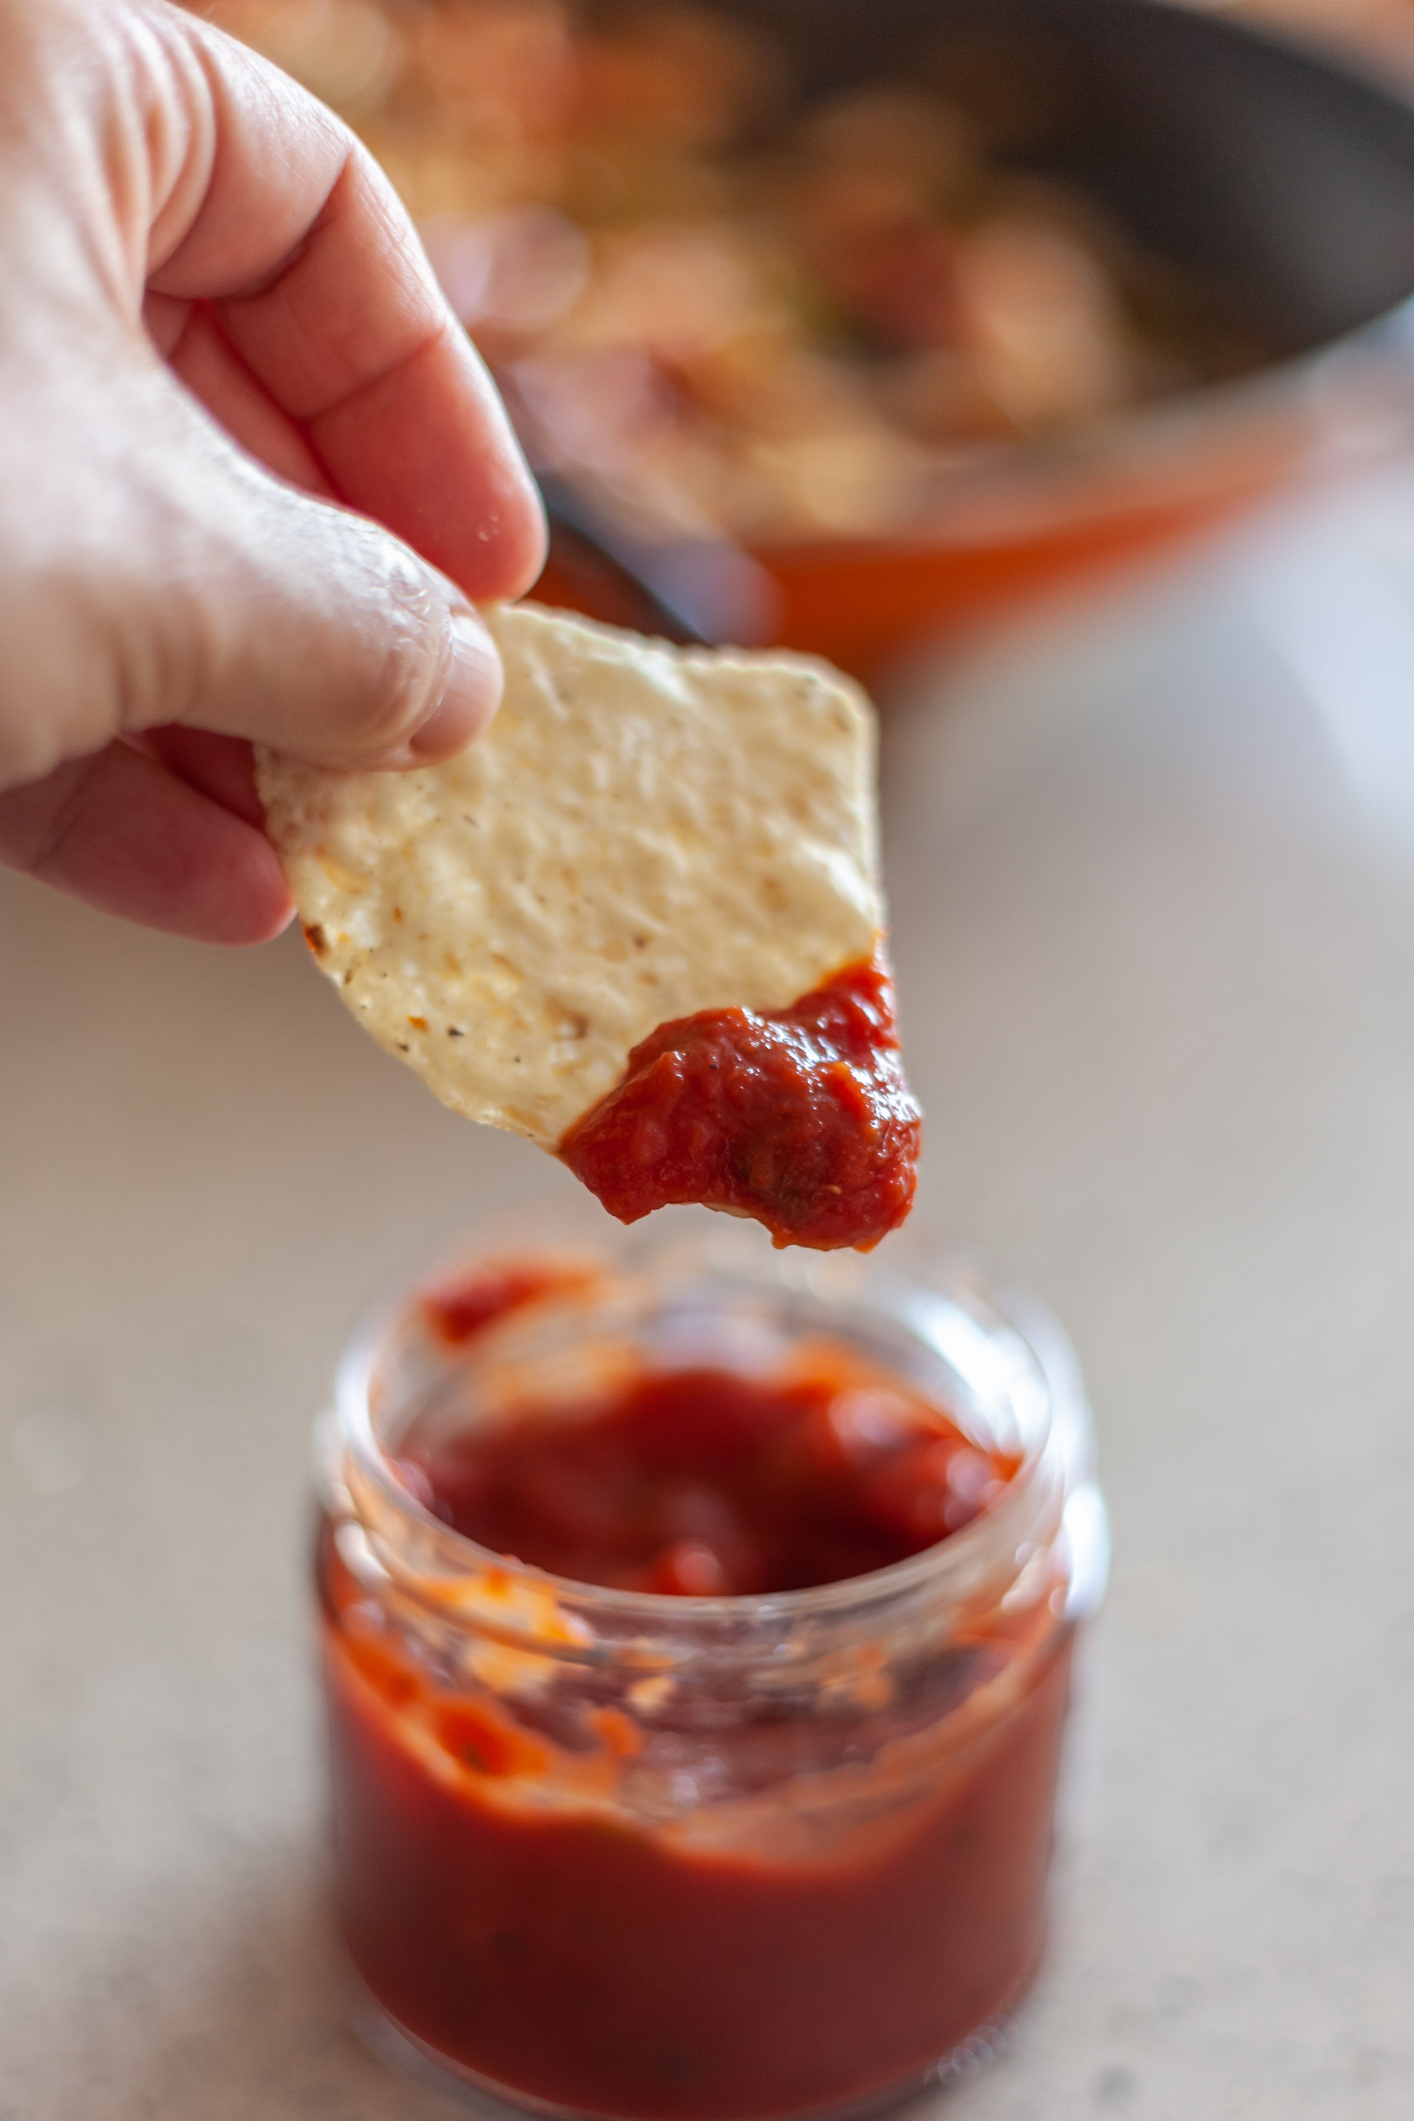 Hand holding a chip with salsa, jar of salsa and a pan in the background